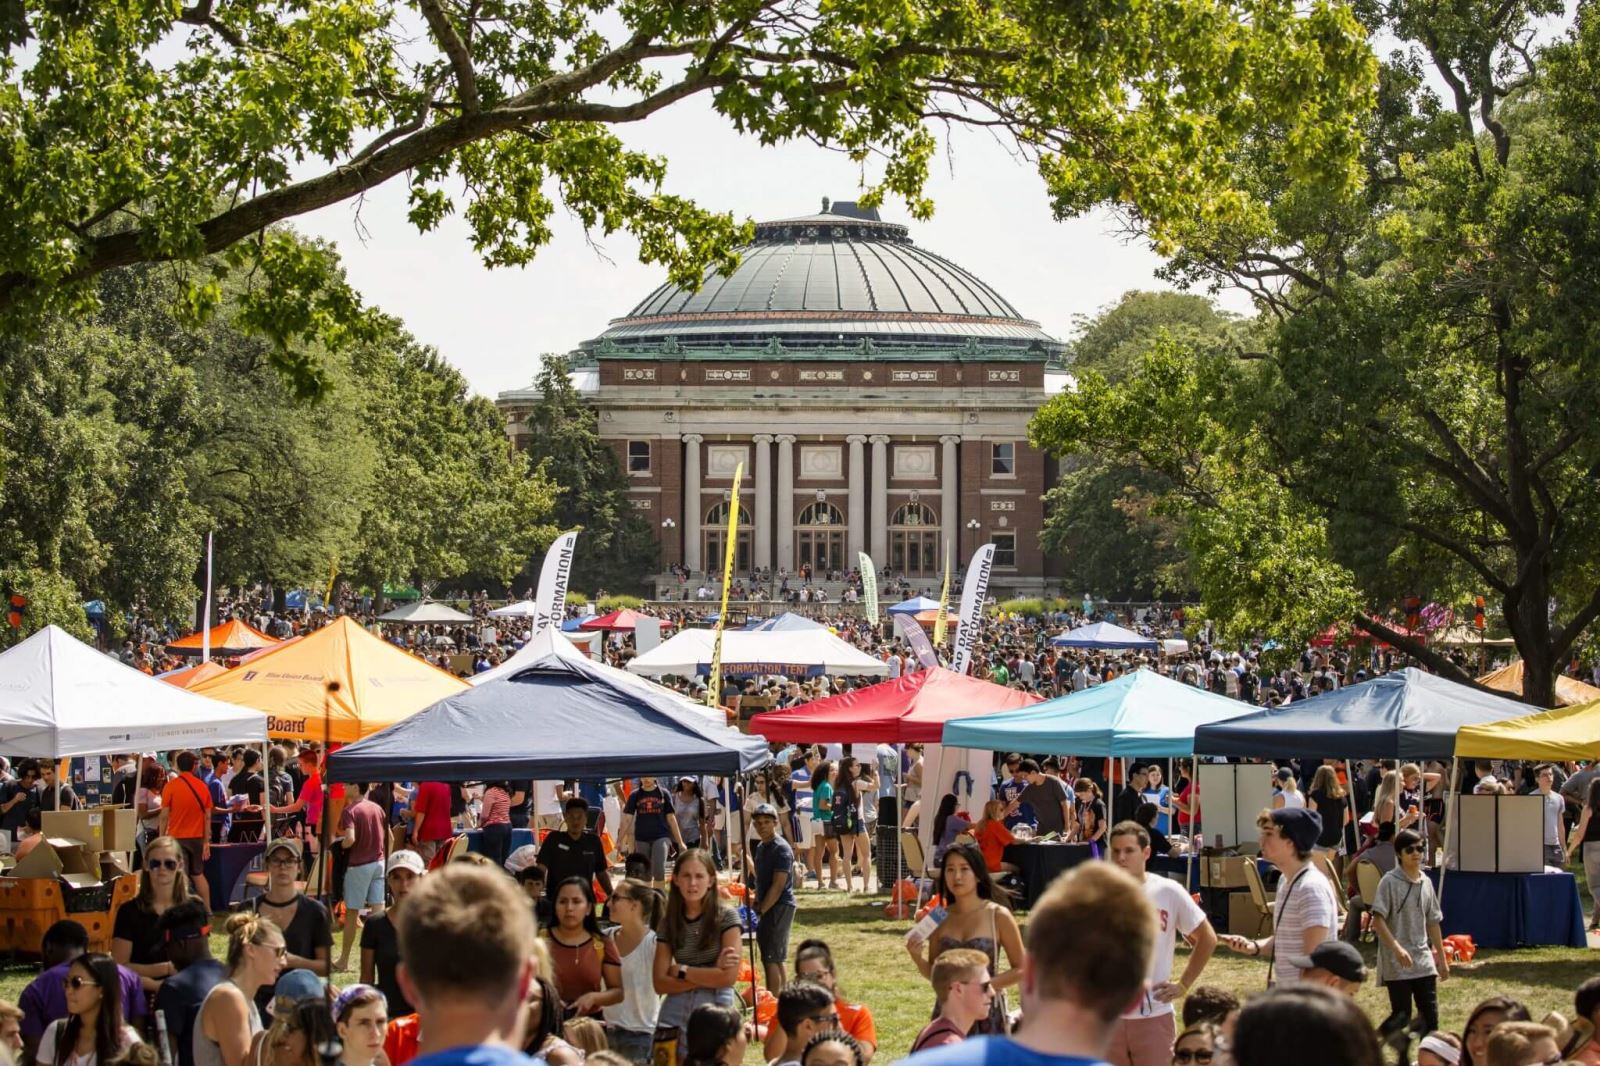 masses of students visit tents on Quad Day with Foellinger Auditorium in background